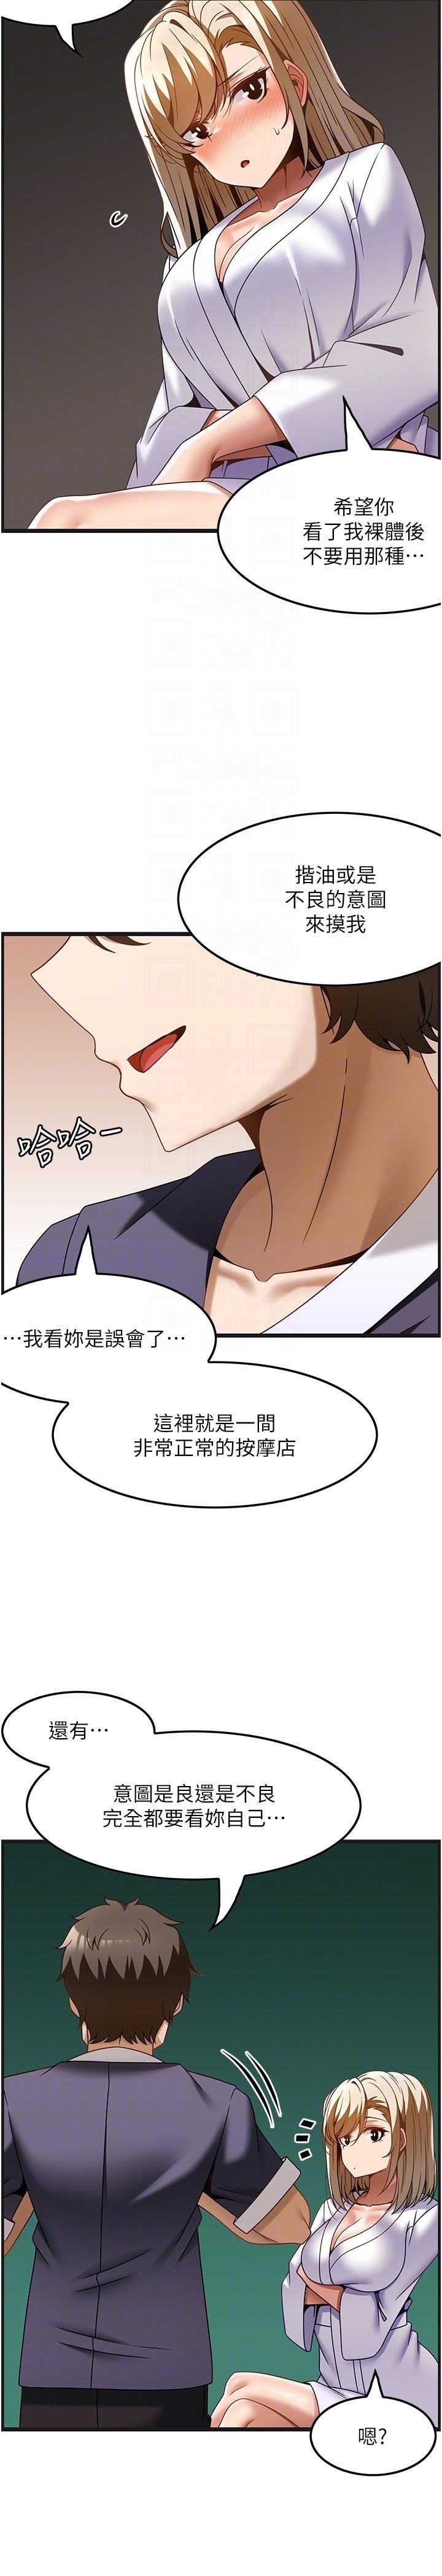 too-good-at-massages-raw-chap-34-17